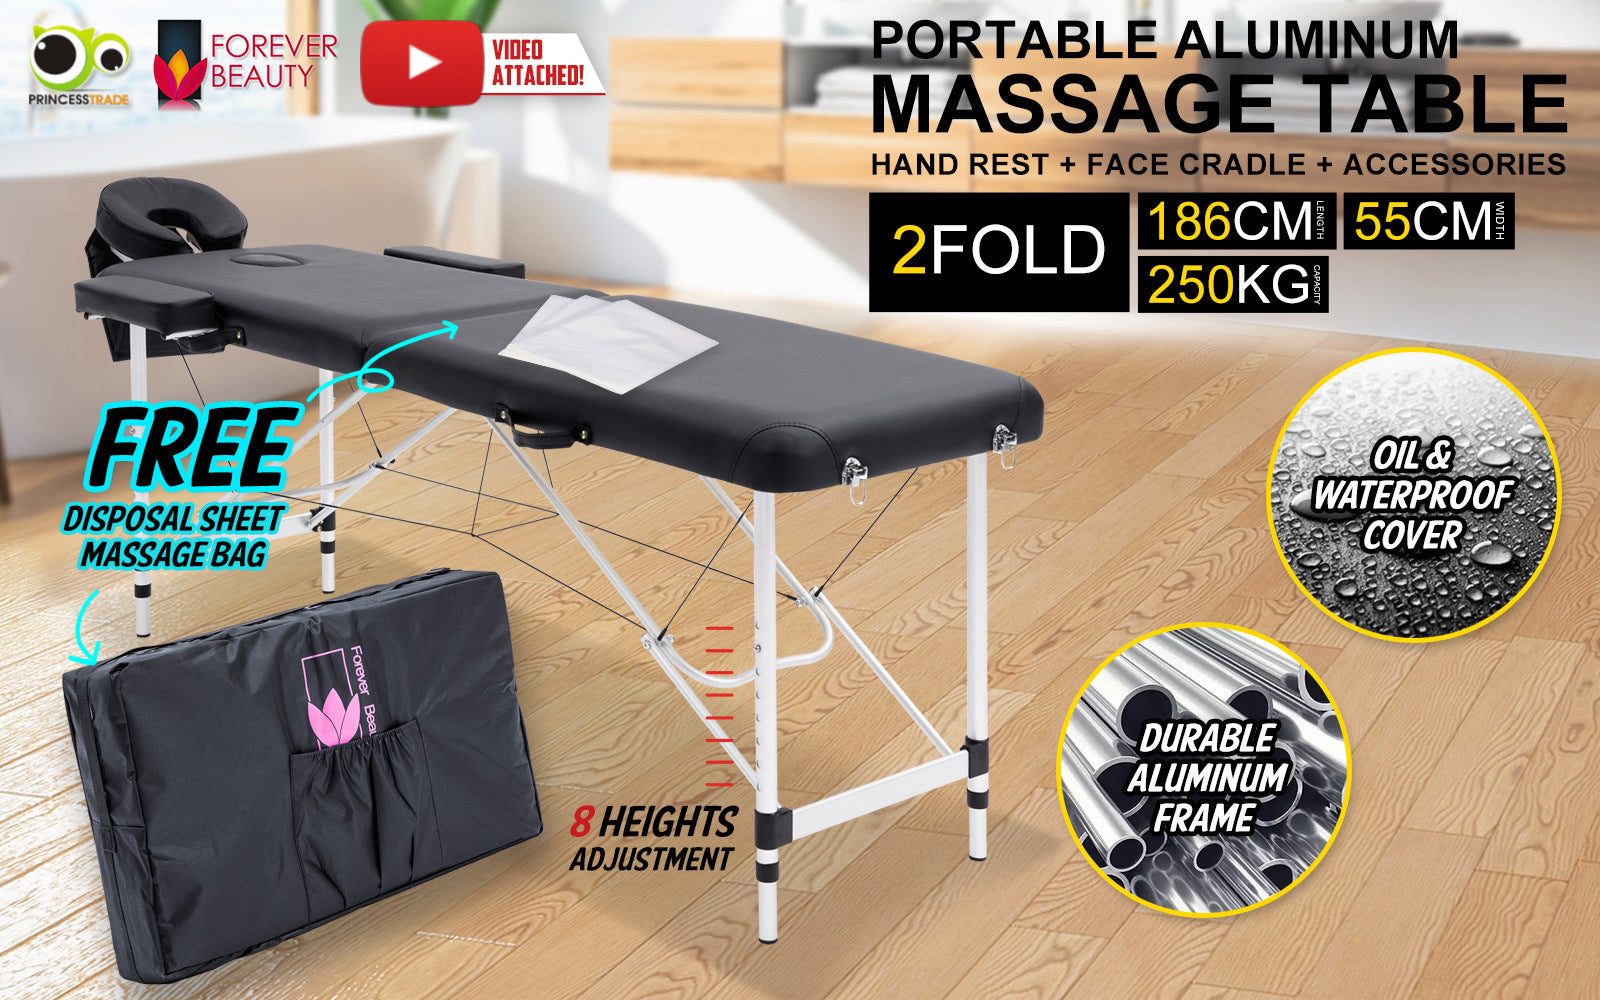 Forever Beauty Black Portable Beauty Massage Table Bed Therapy Waxing 2 Fold 55cm Aluminium - SILBERSHELL